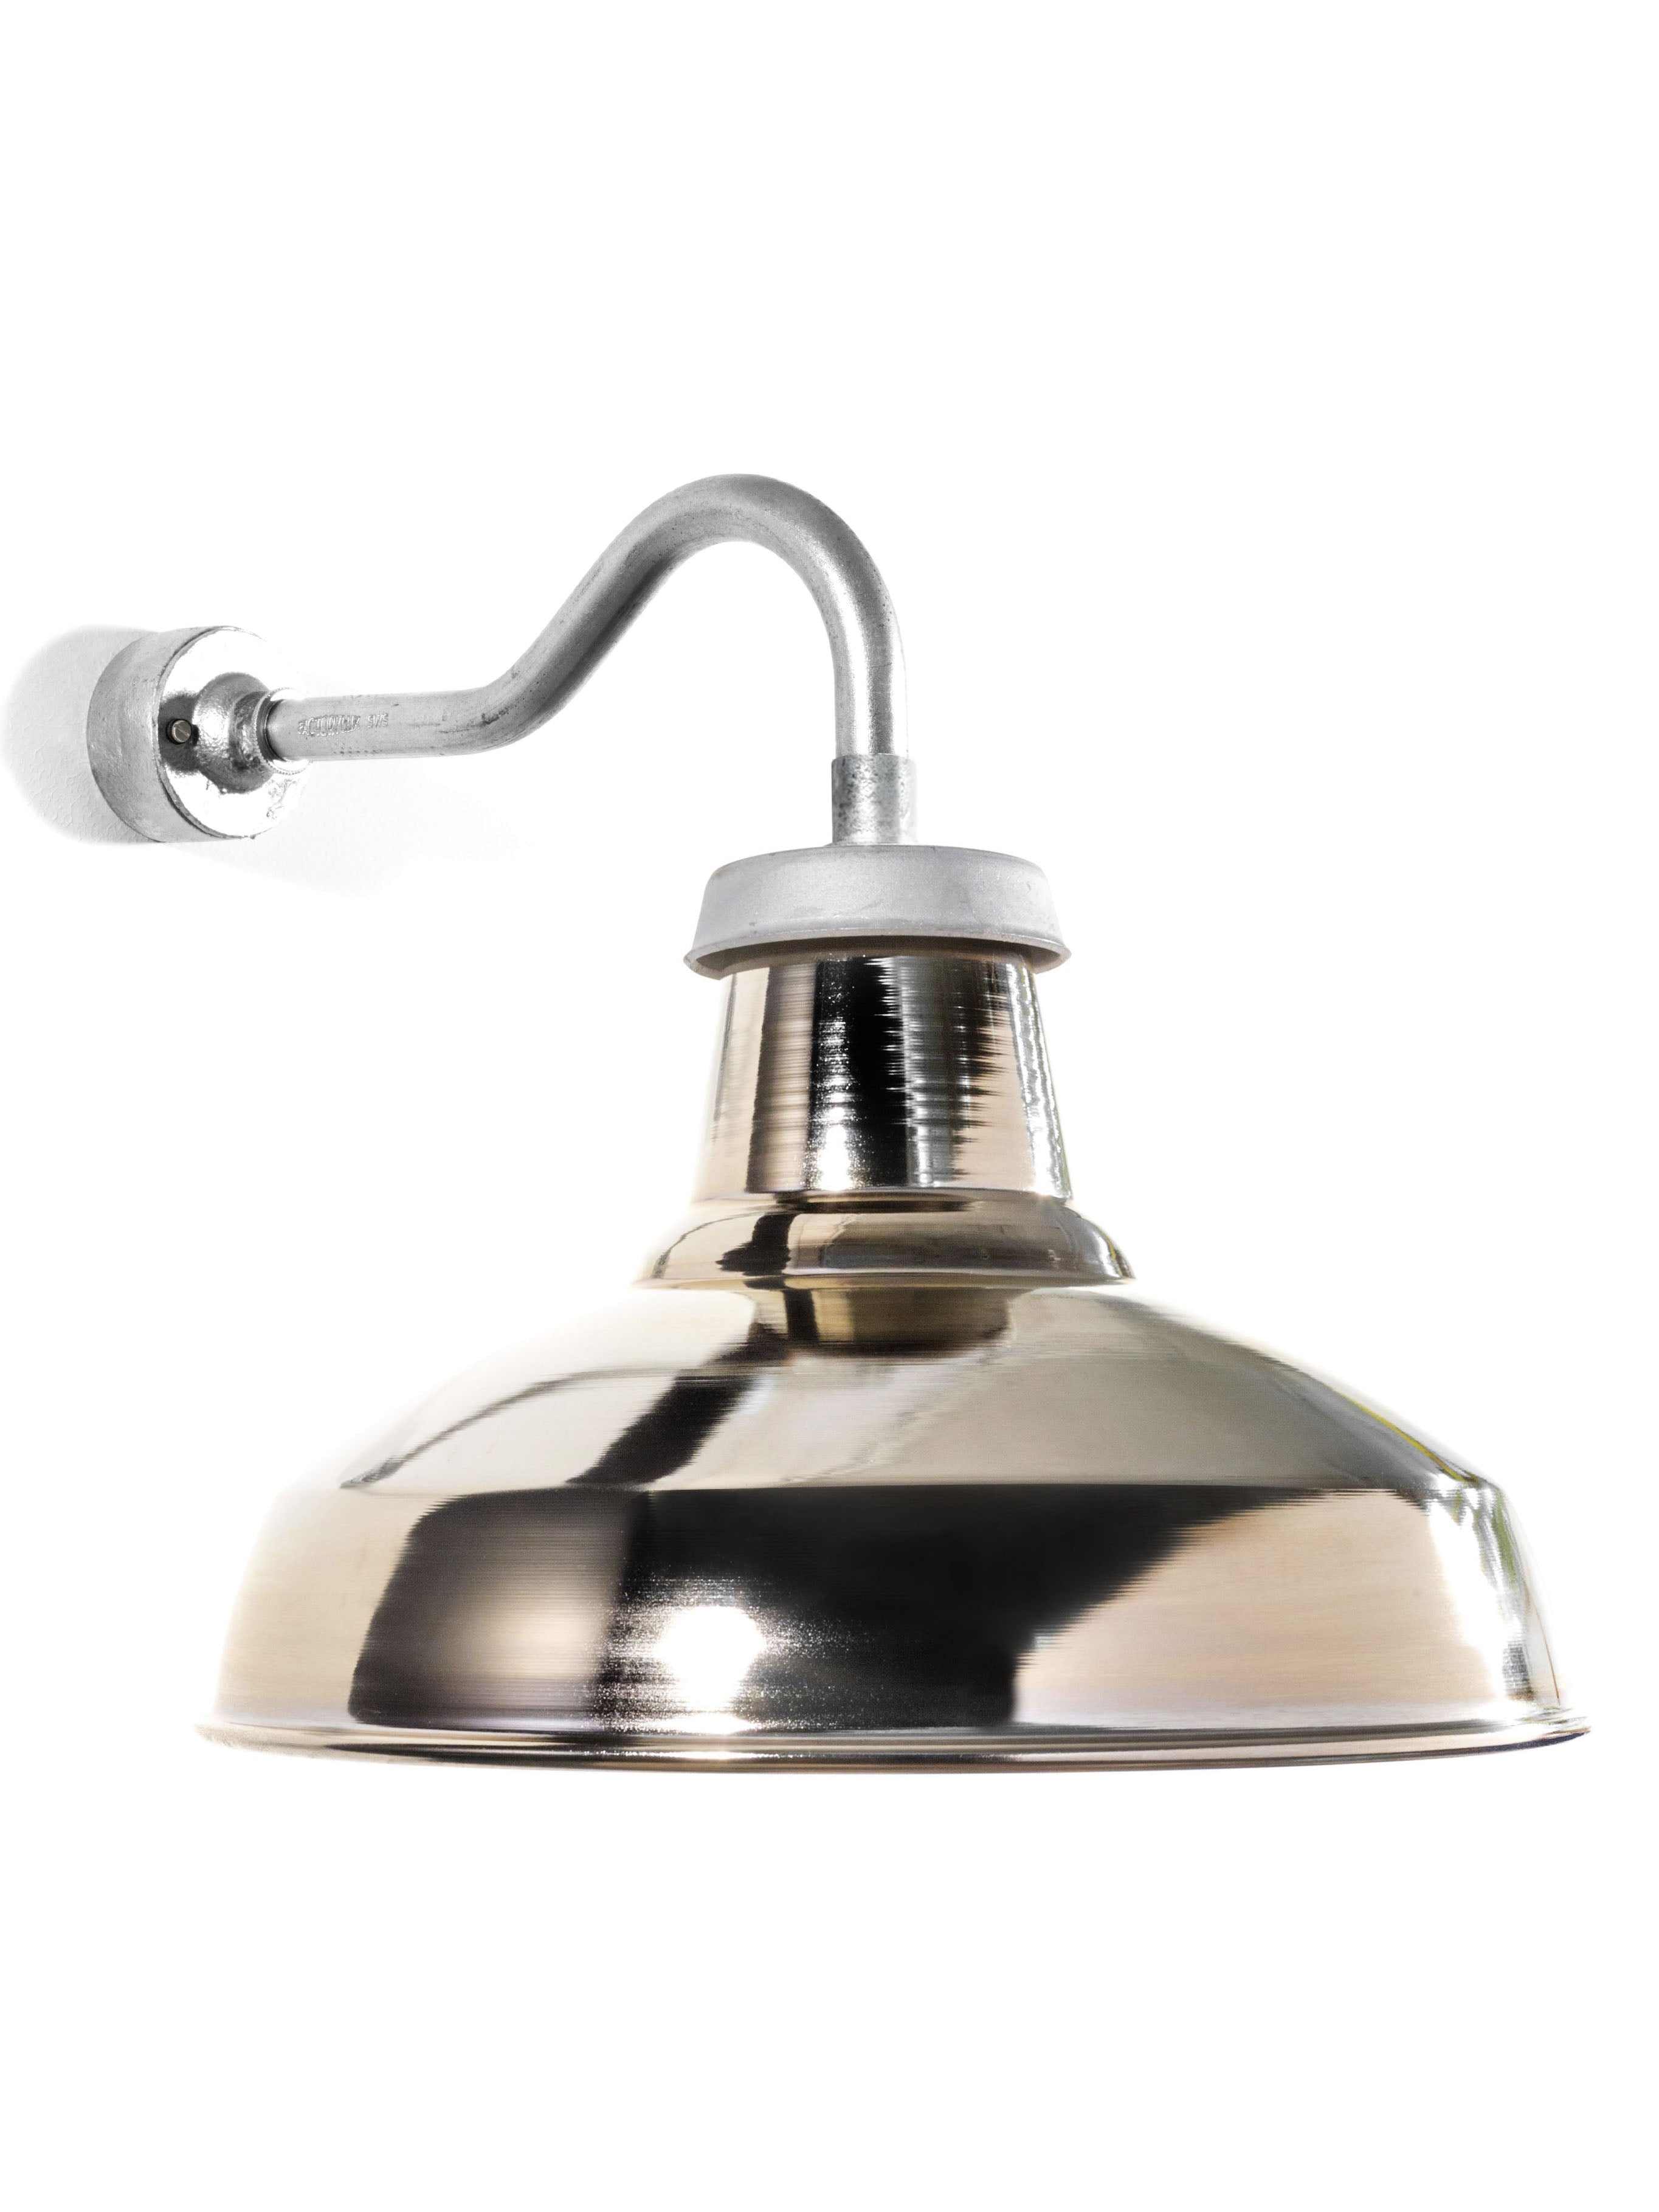 Industrial Swan Neck Light | Silver Nickel Shade | End-Of-Line